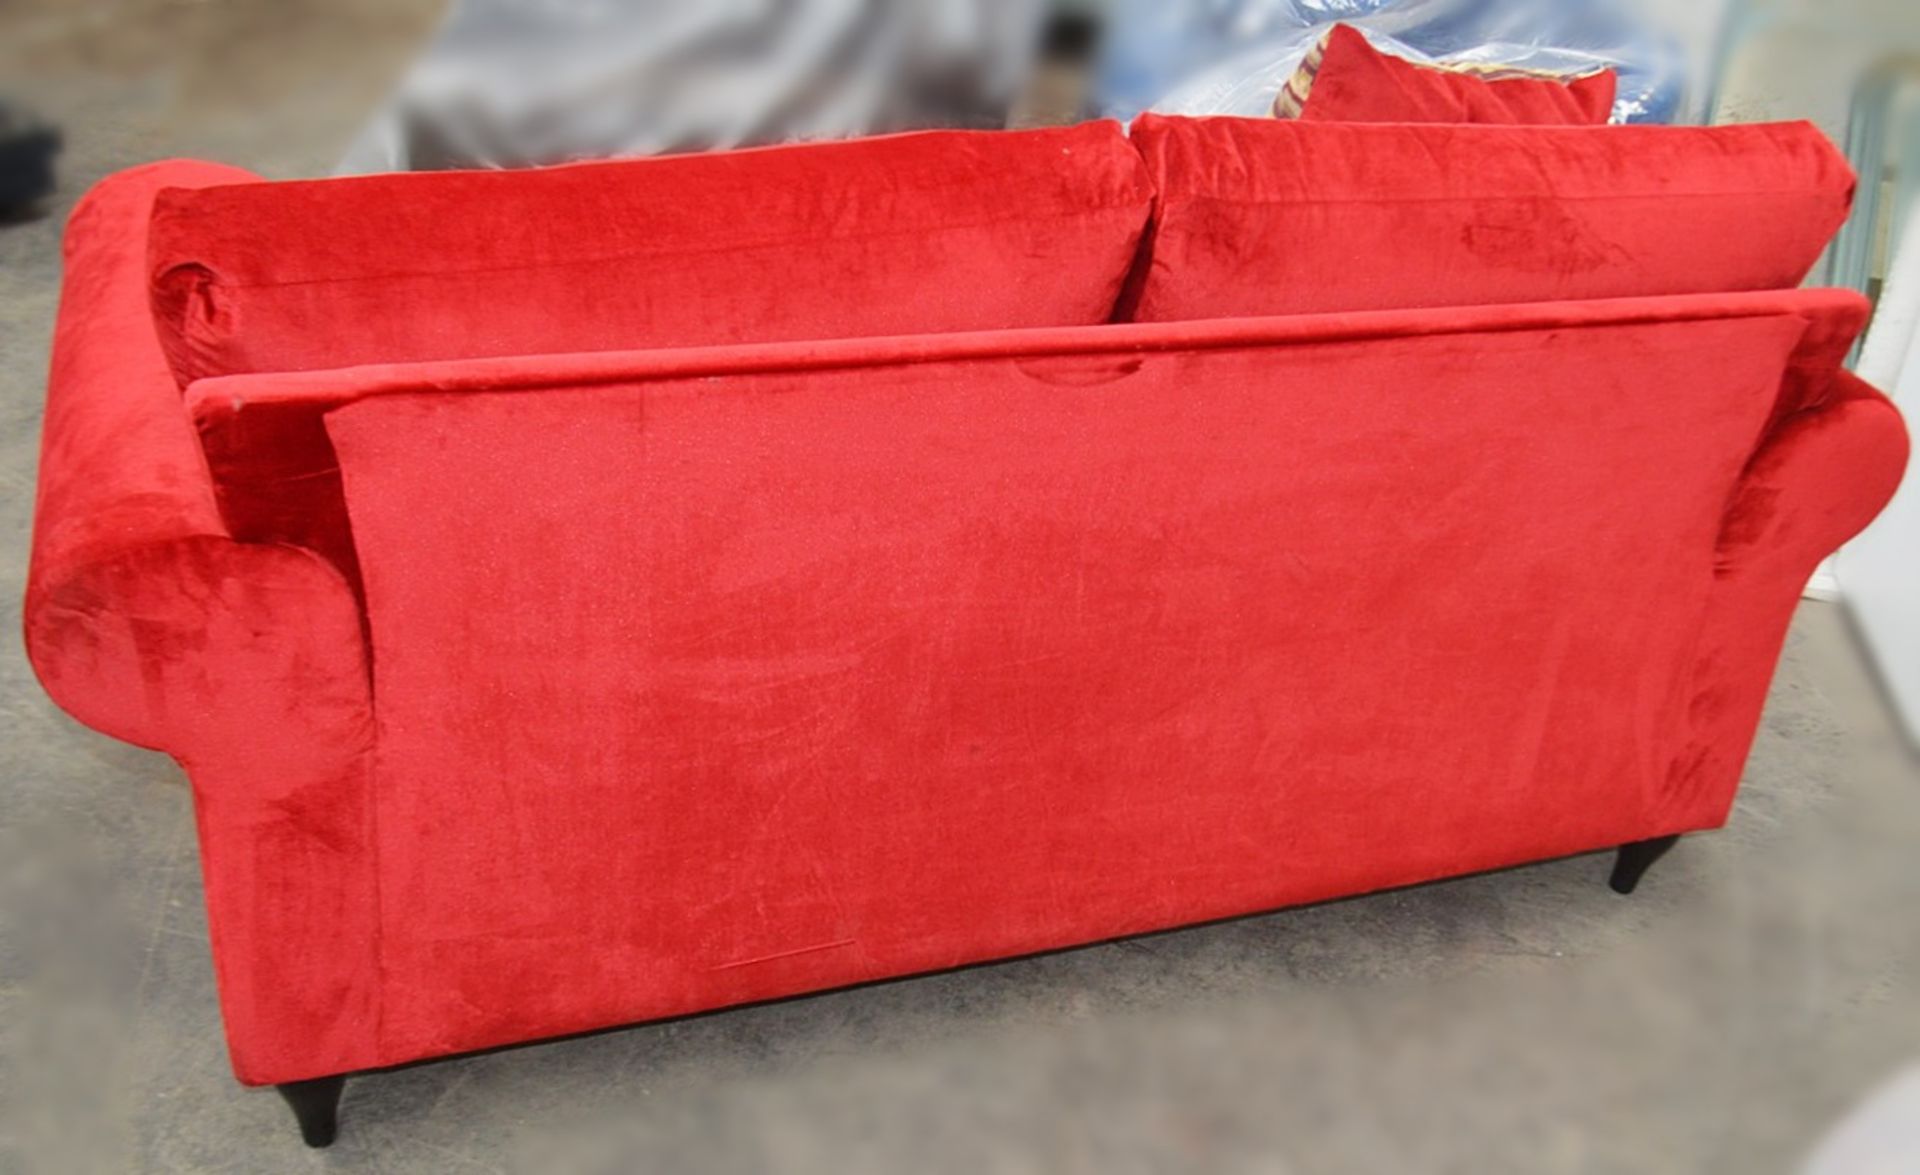 1 x Bespoke 2-Seater Commercial Sofa In A Bright Red Velvet With Complimenting Cushion - - Image 6 of 6